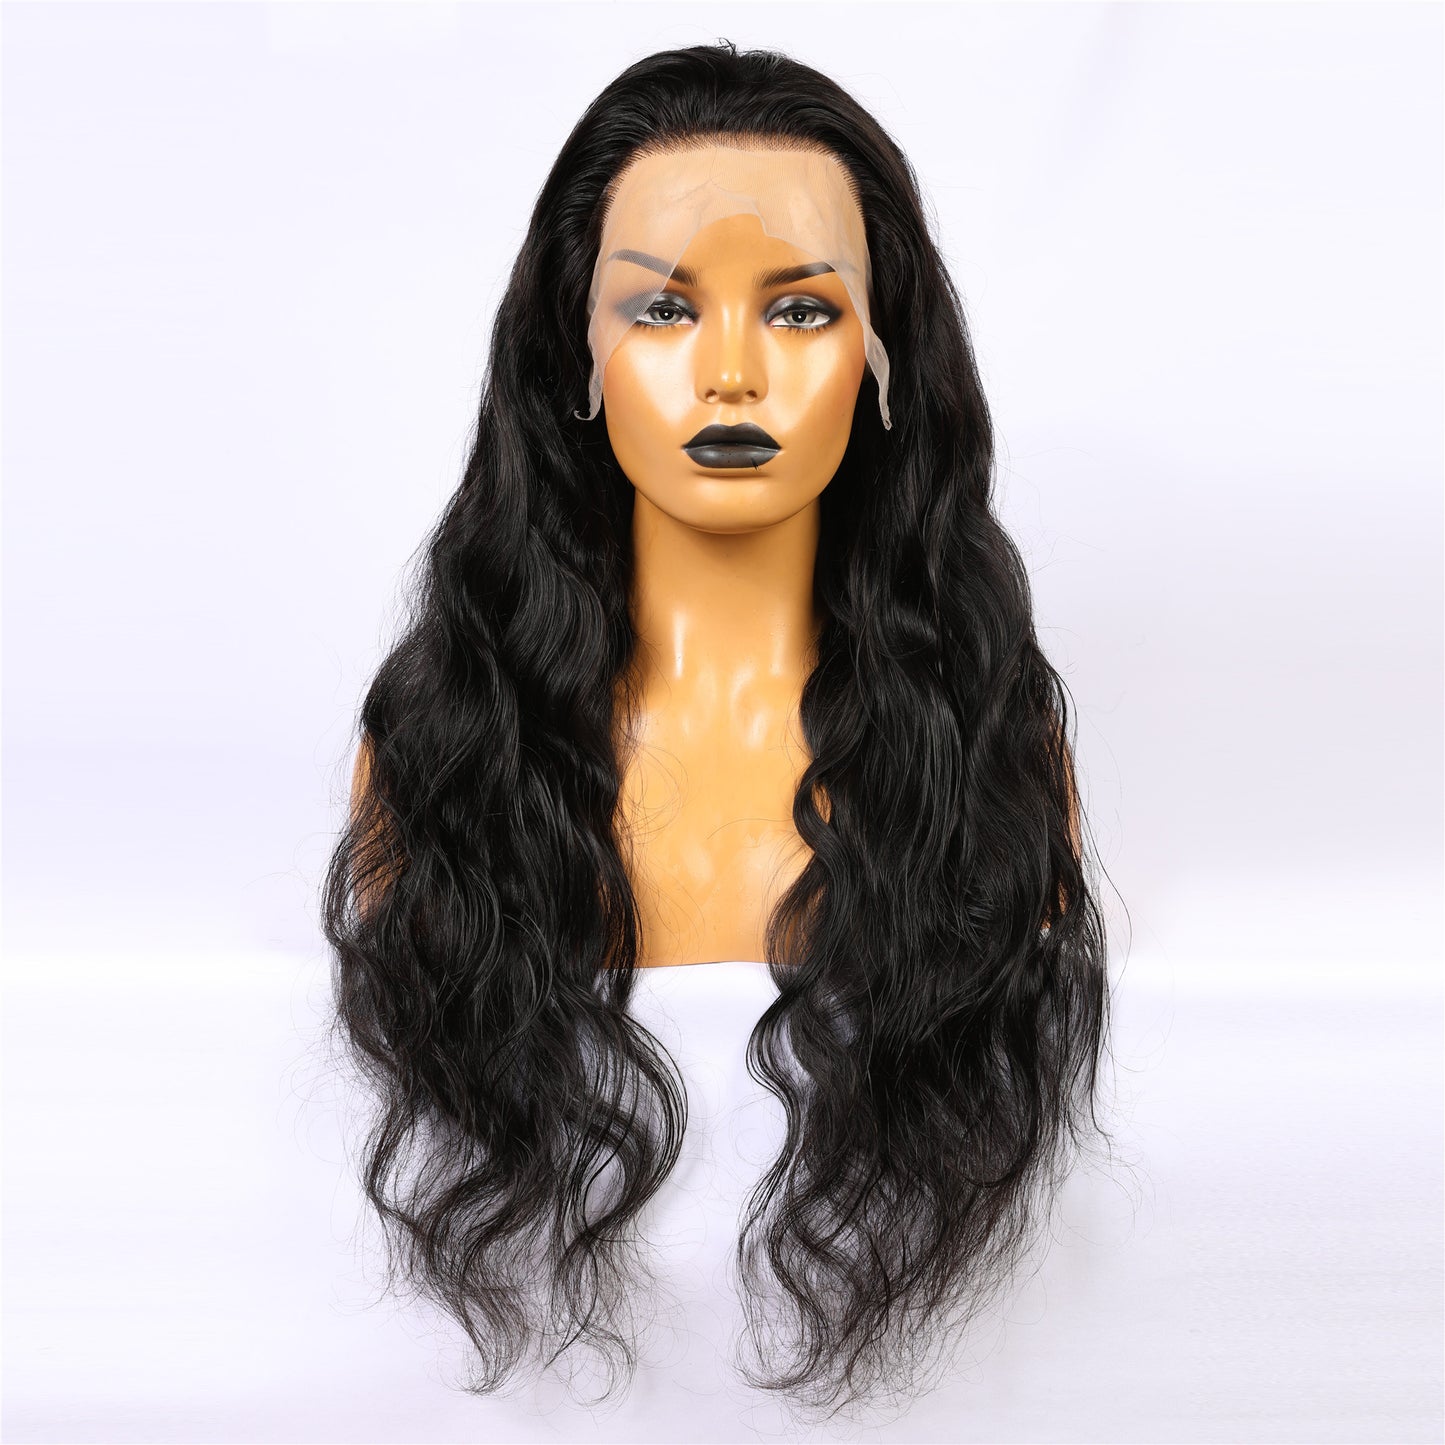 Real Human Hair Wigs Body Wave Style